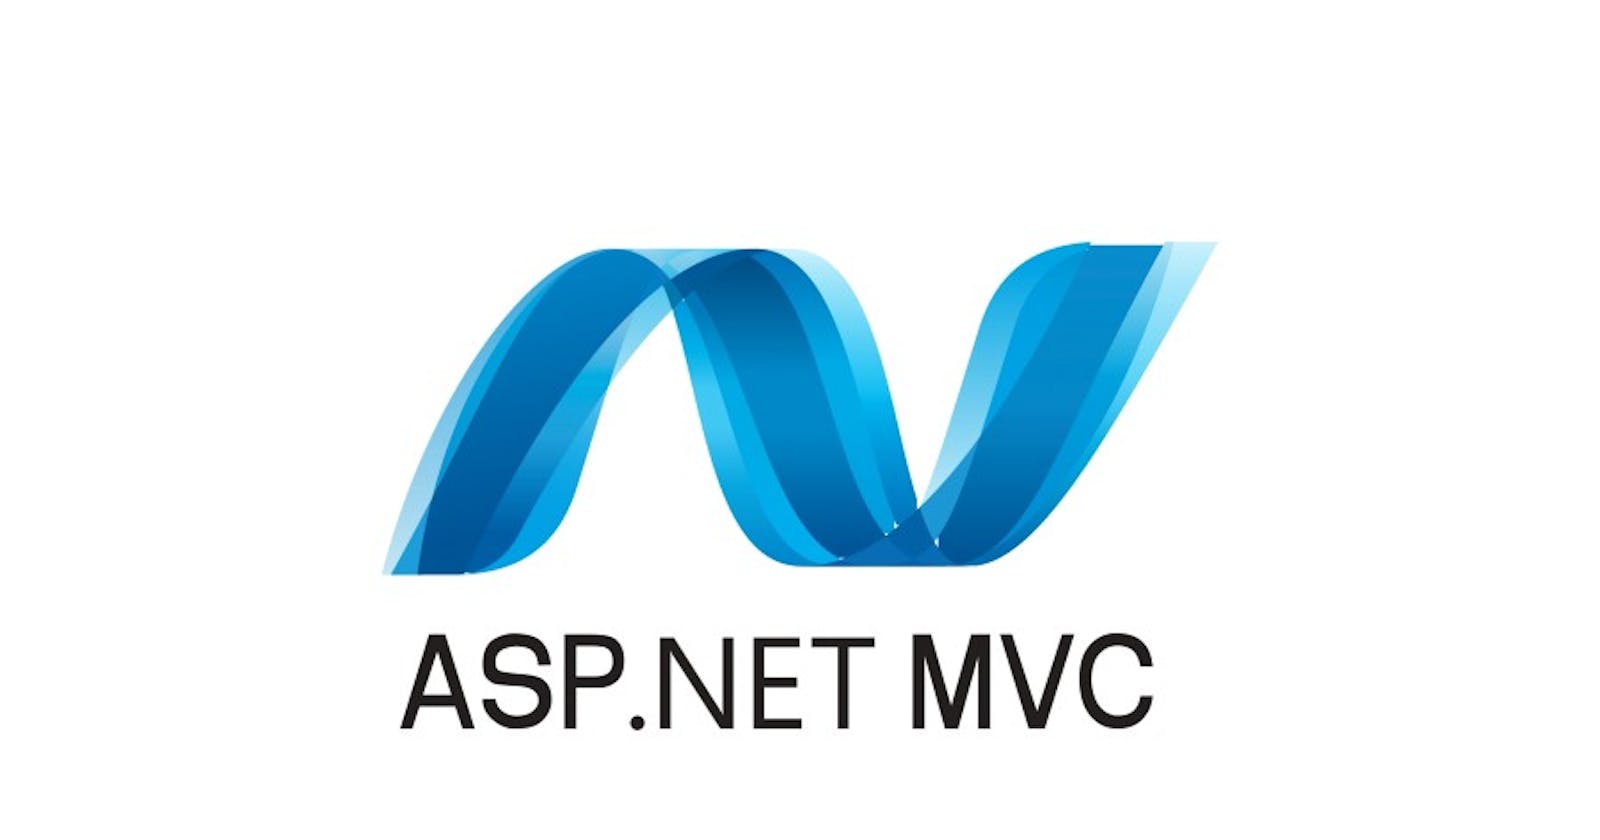 ASP.NET MVC interview questions and answers for software developers